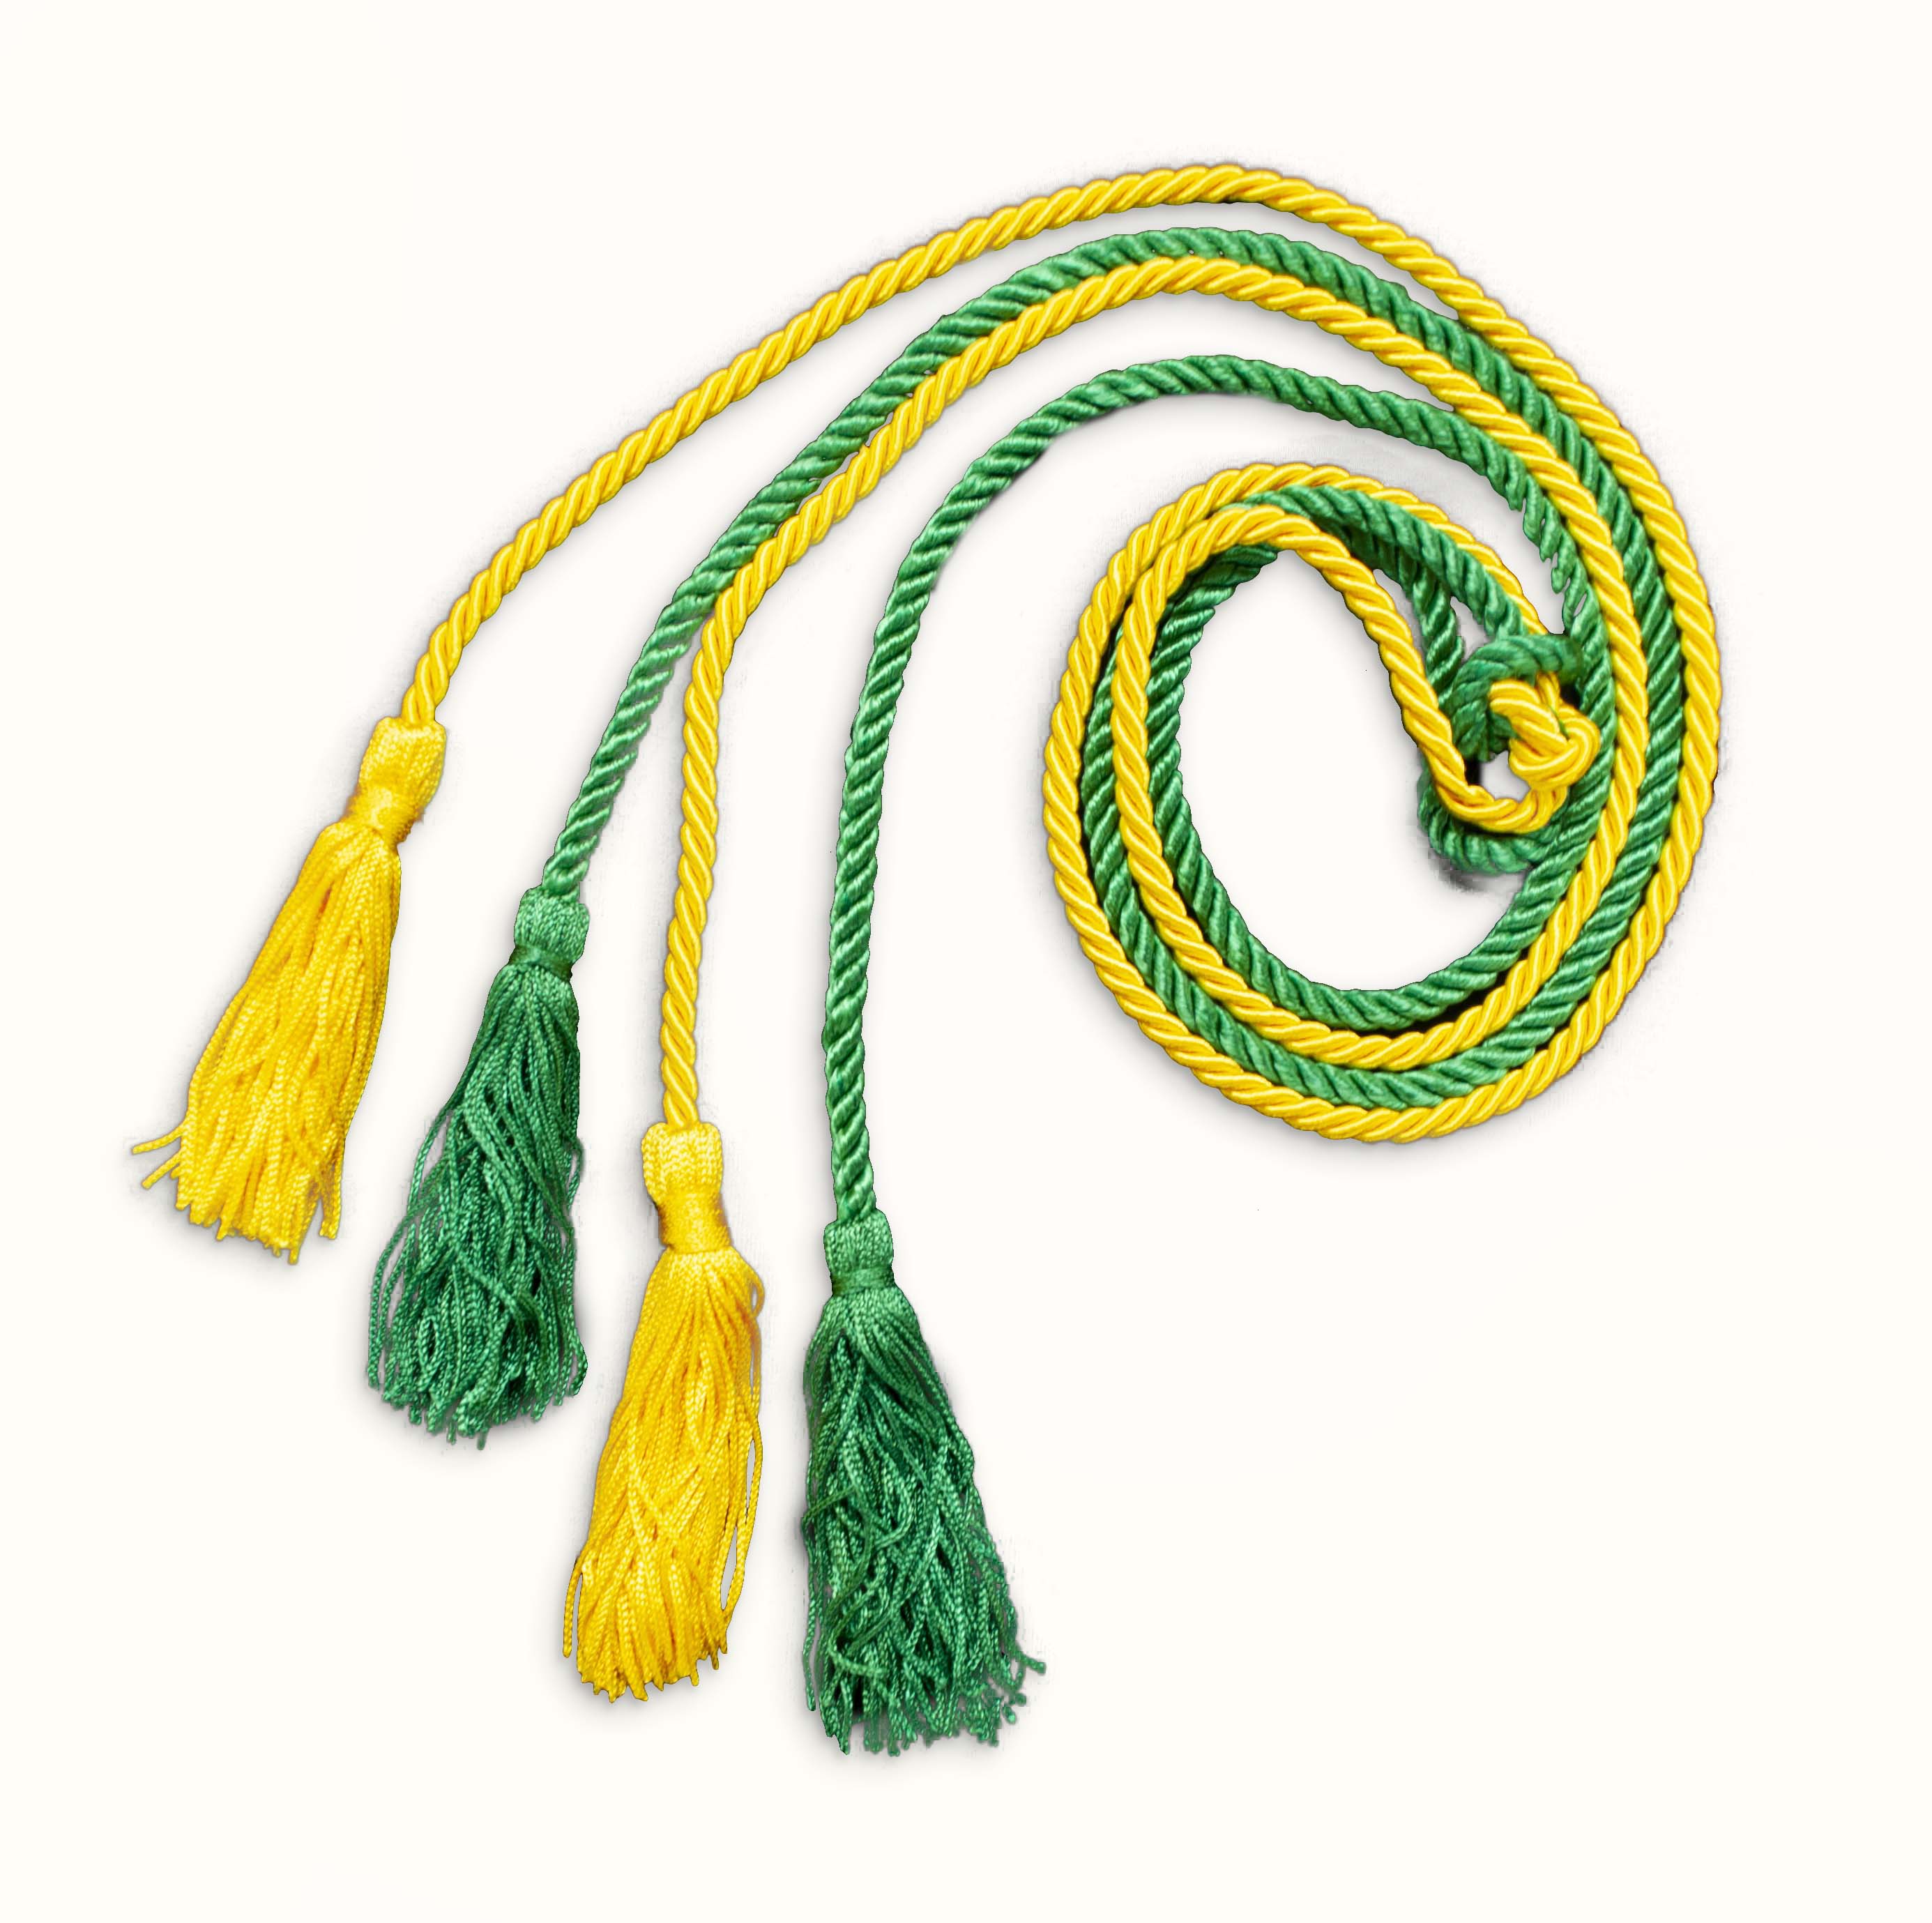 Green and Yellow Honor Cords